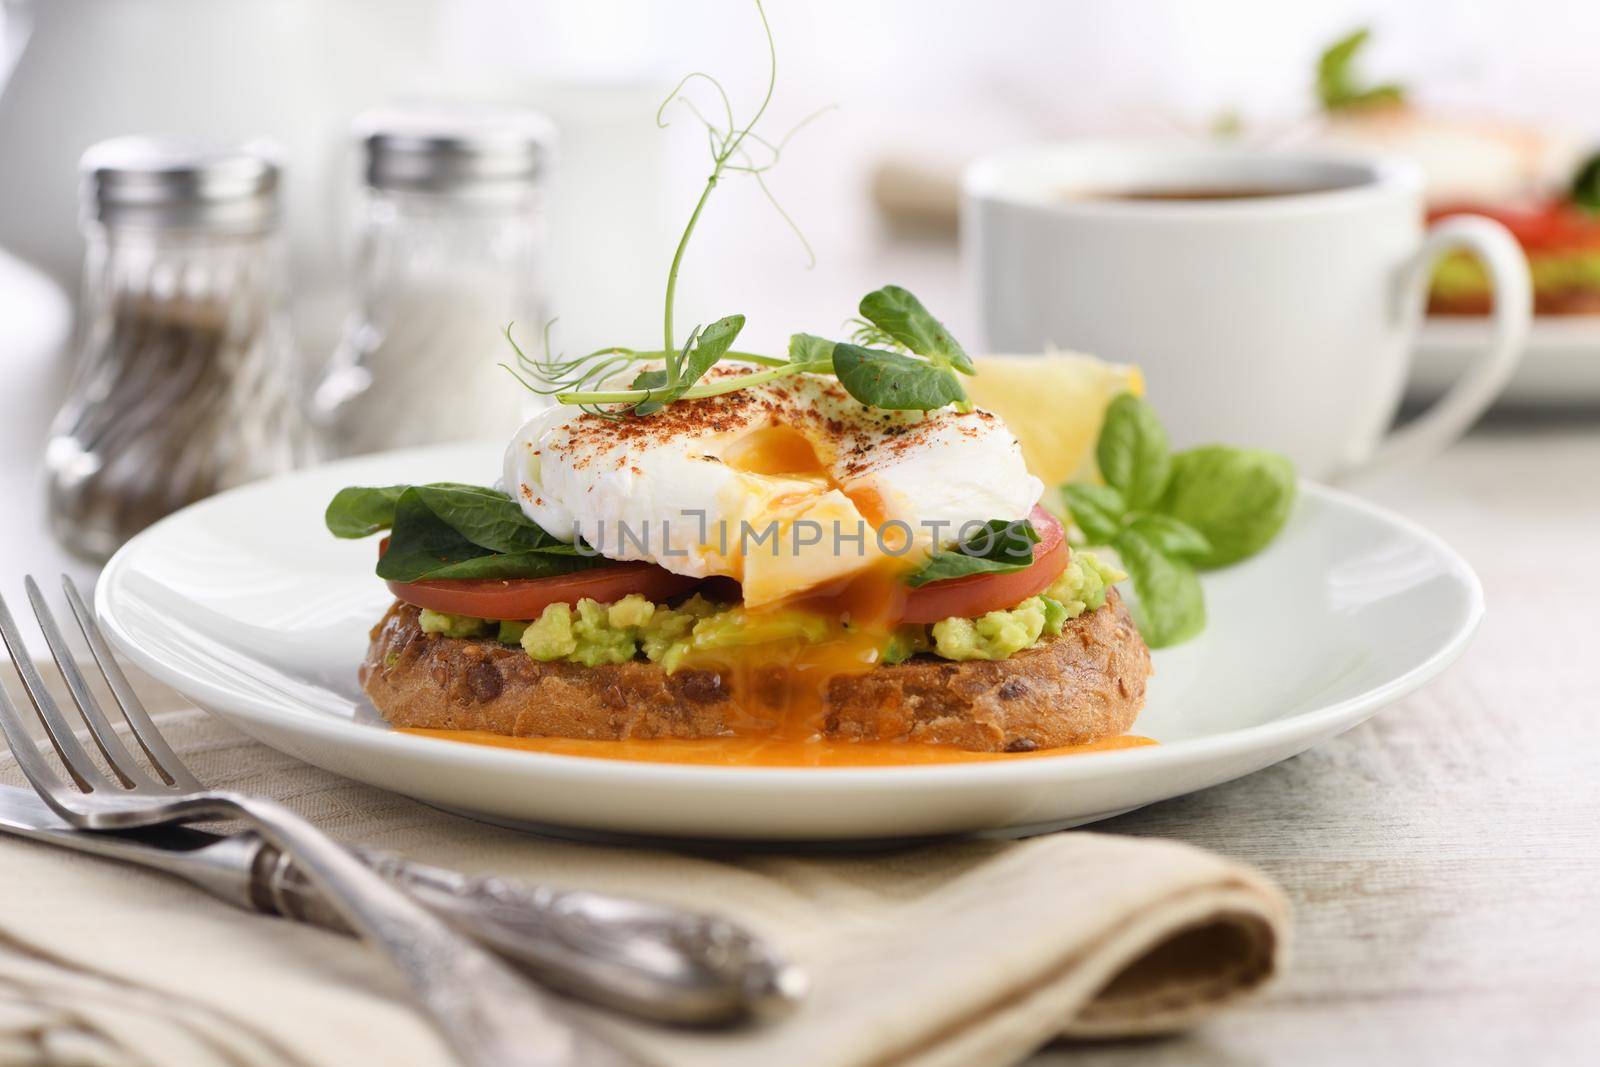 Eggs Benedict with guacamole on cereal bread by Apolonia